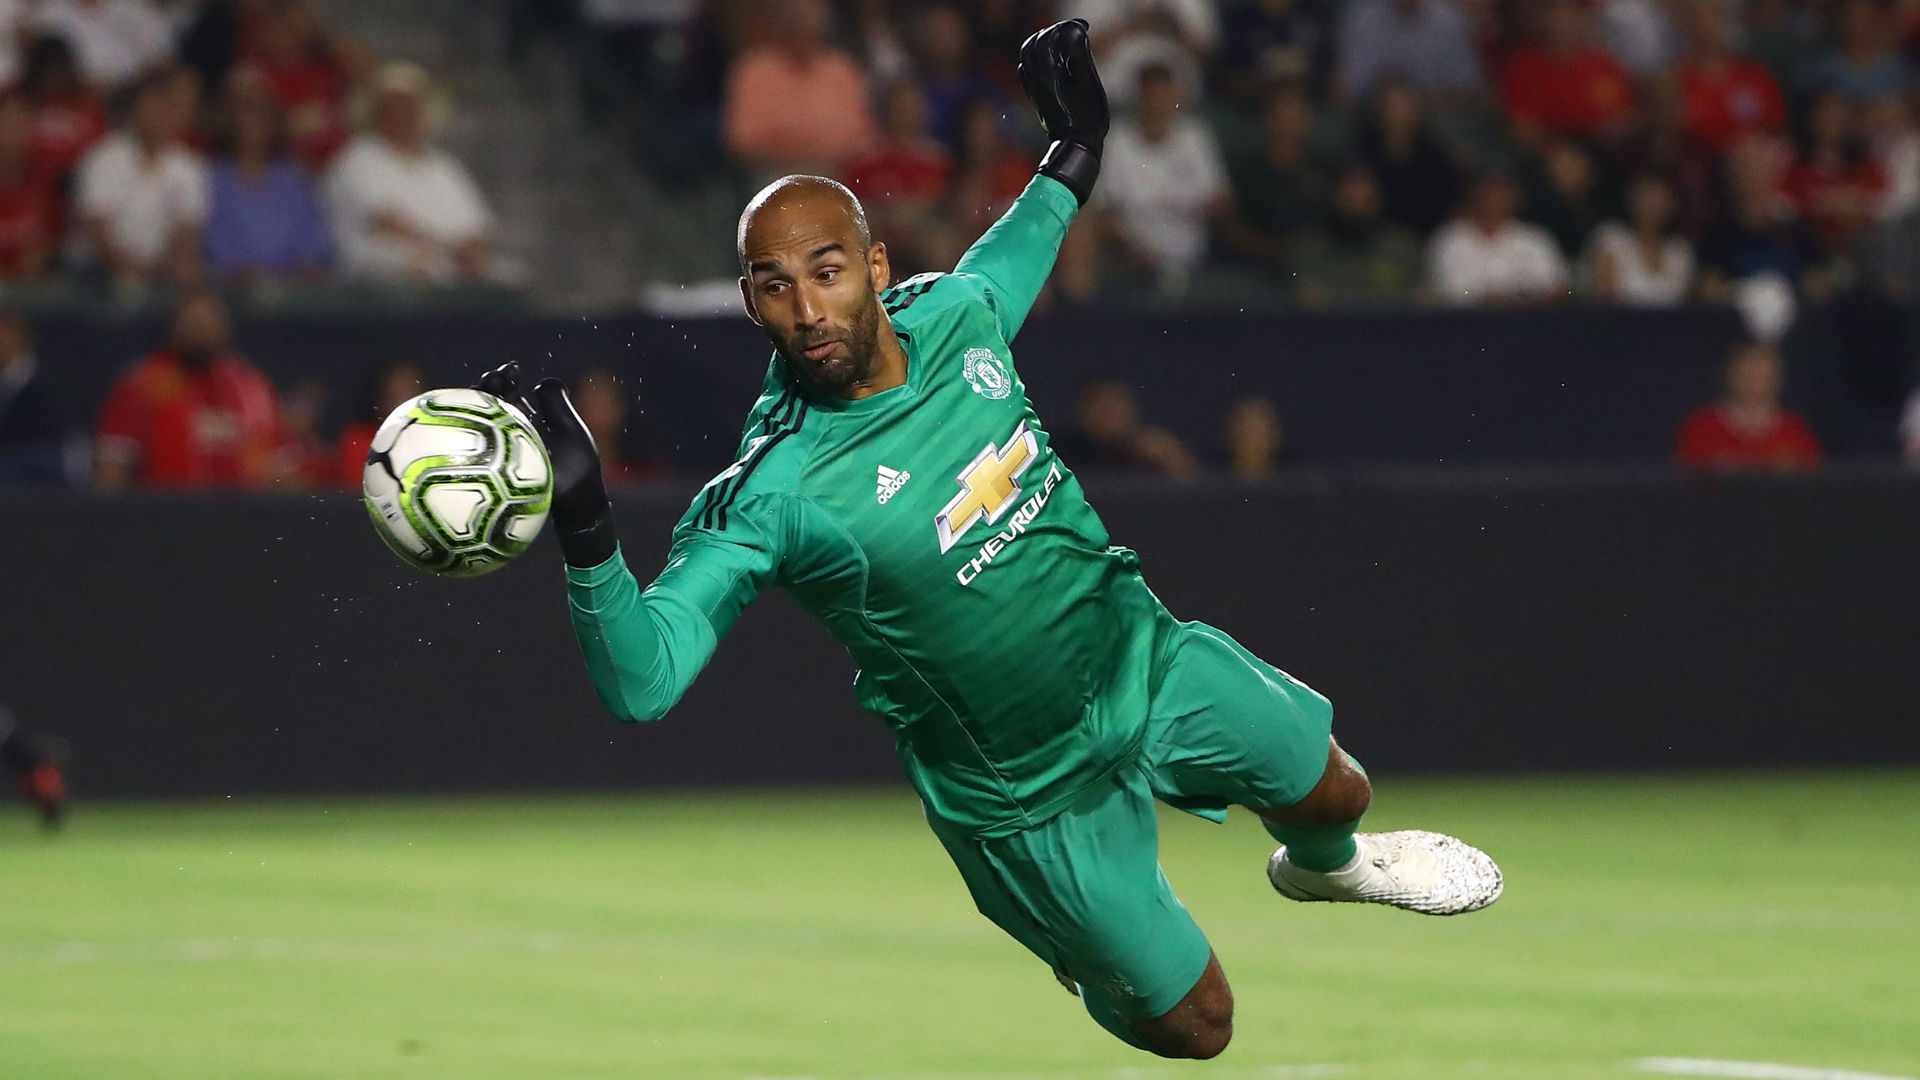 Grant explains why he signed new Manchester United contract to stay as fourth-choice goalkeeper | Goal.com